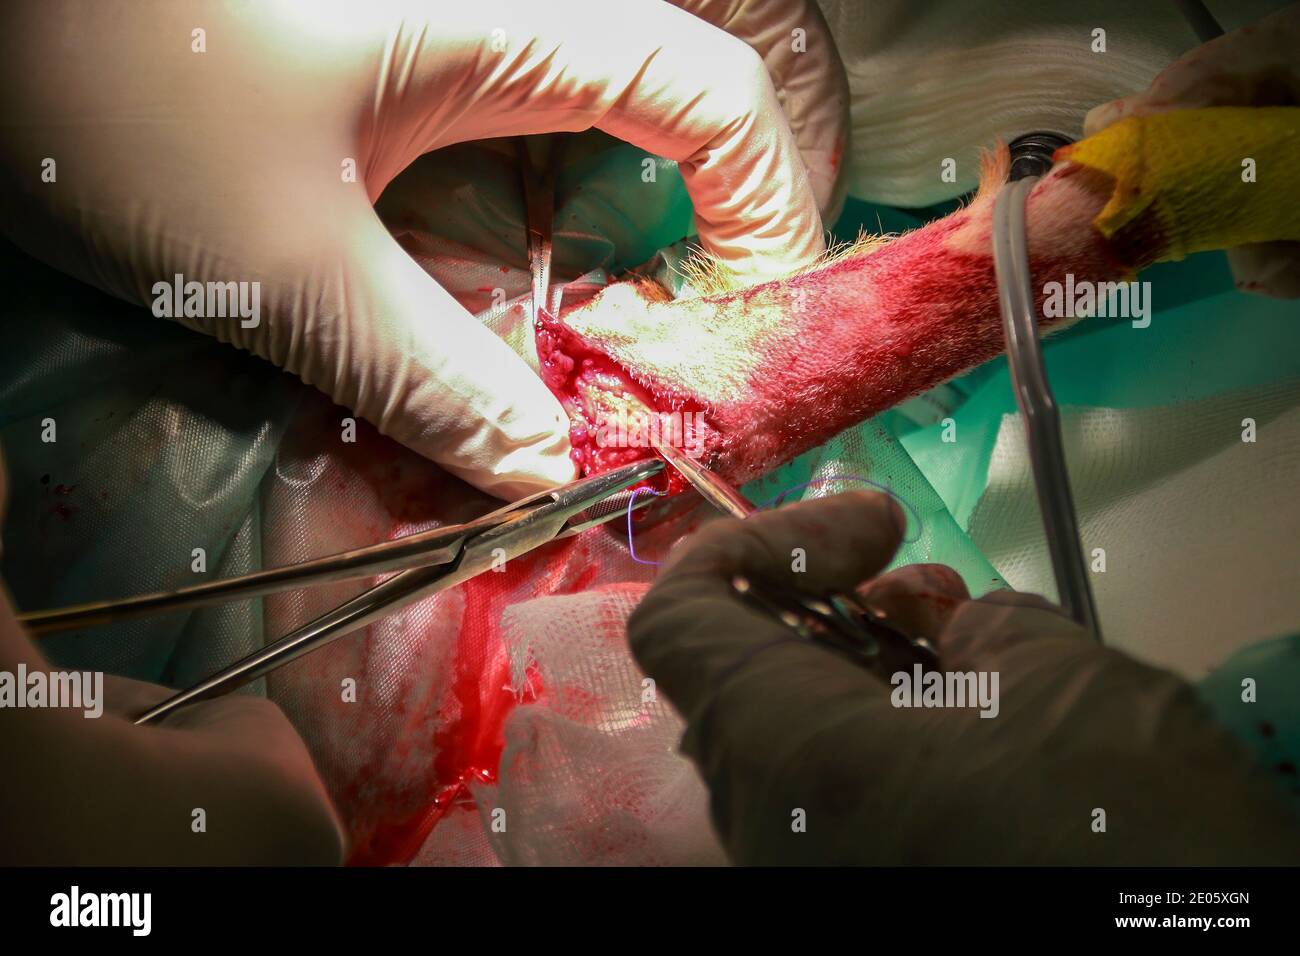 A Veterinary Surgeon removes a tumor from under the tail of a Labrador Retiever puppy Stock Photo